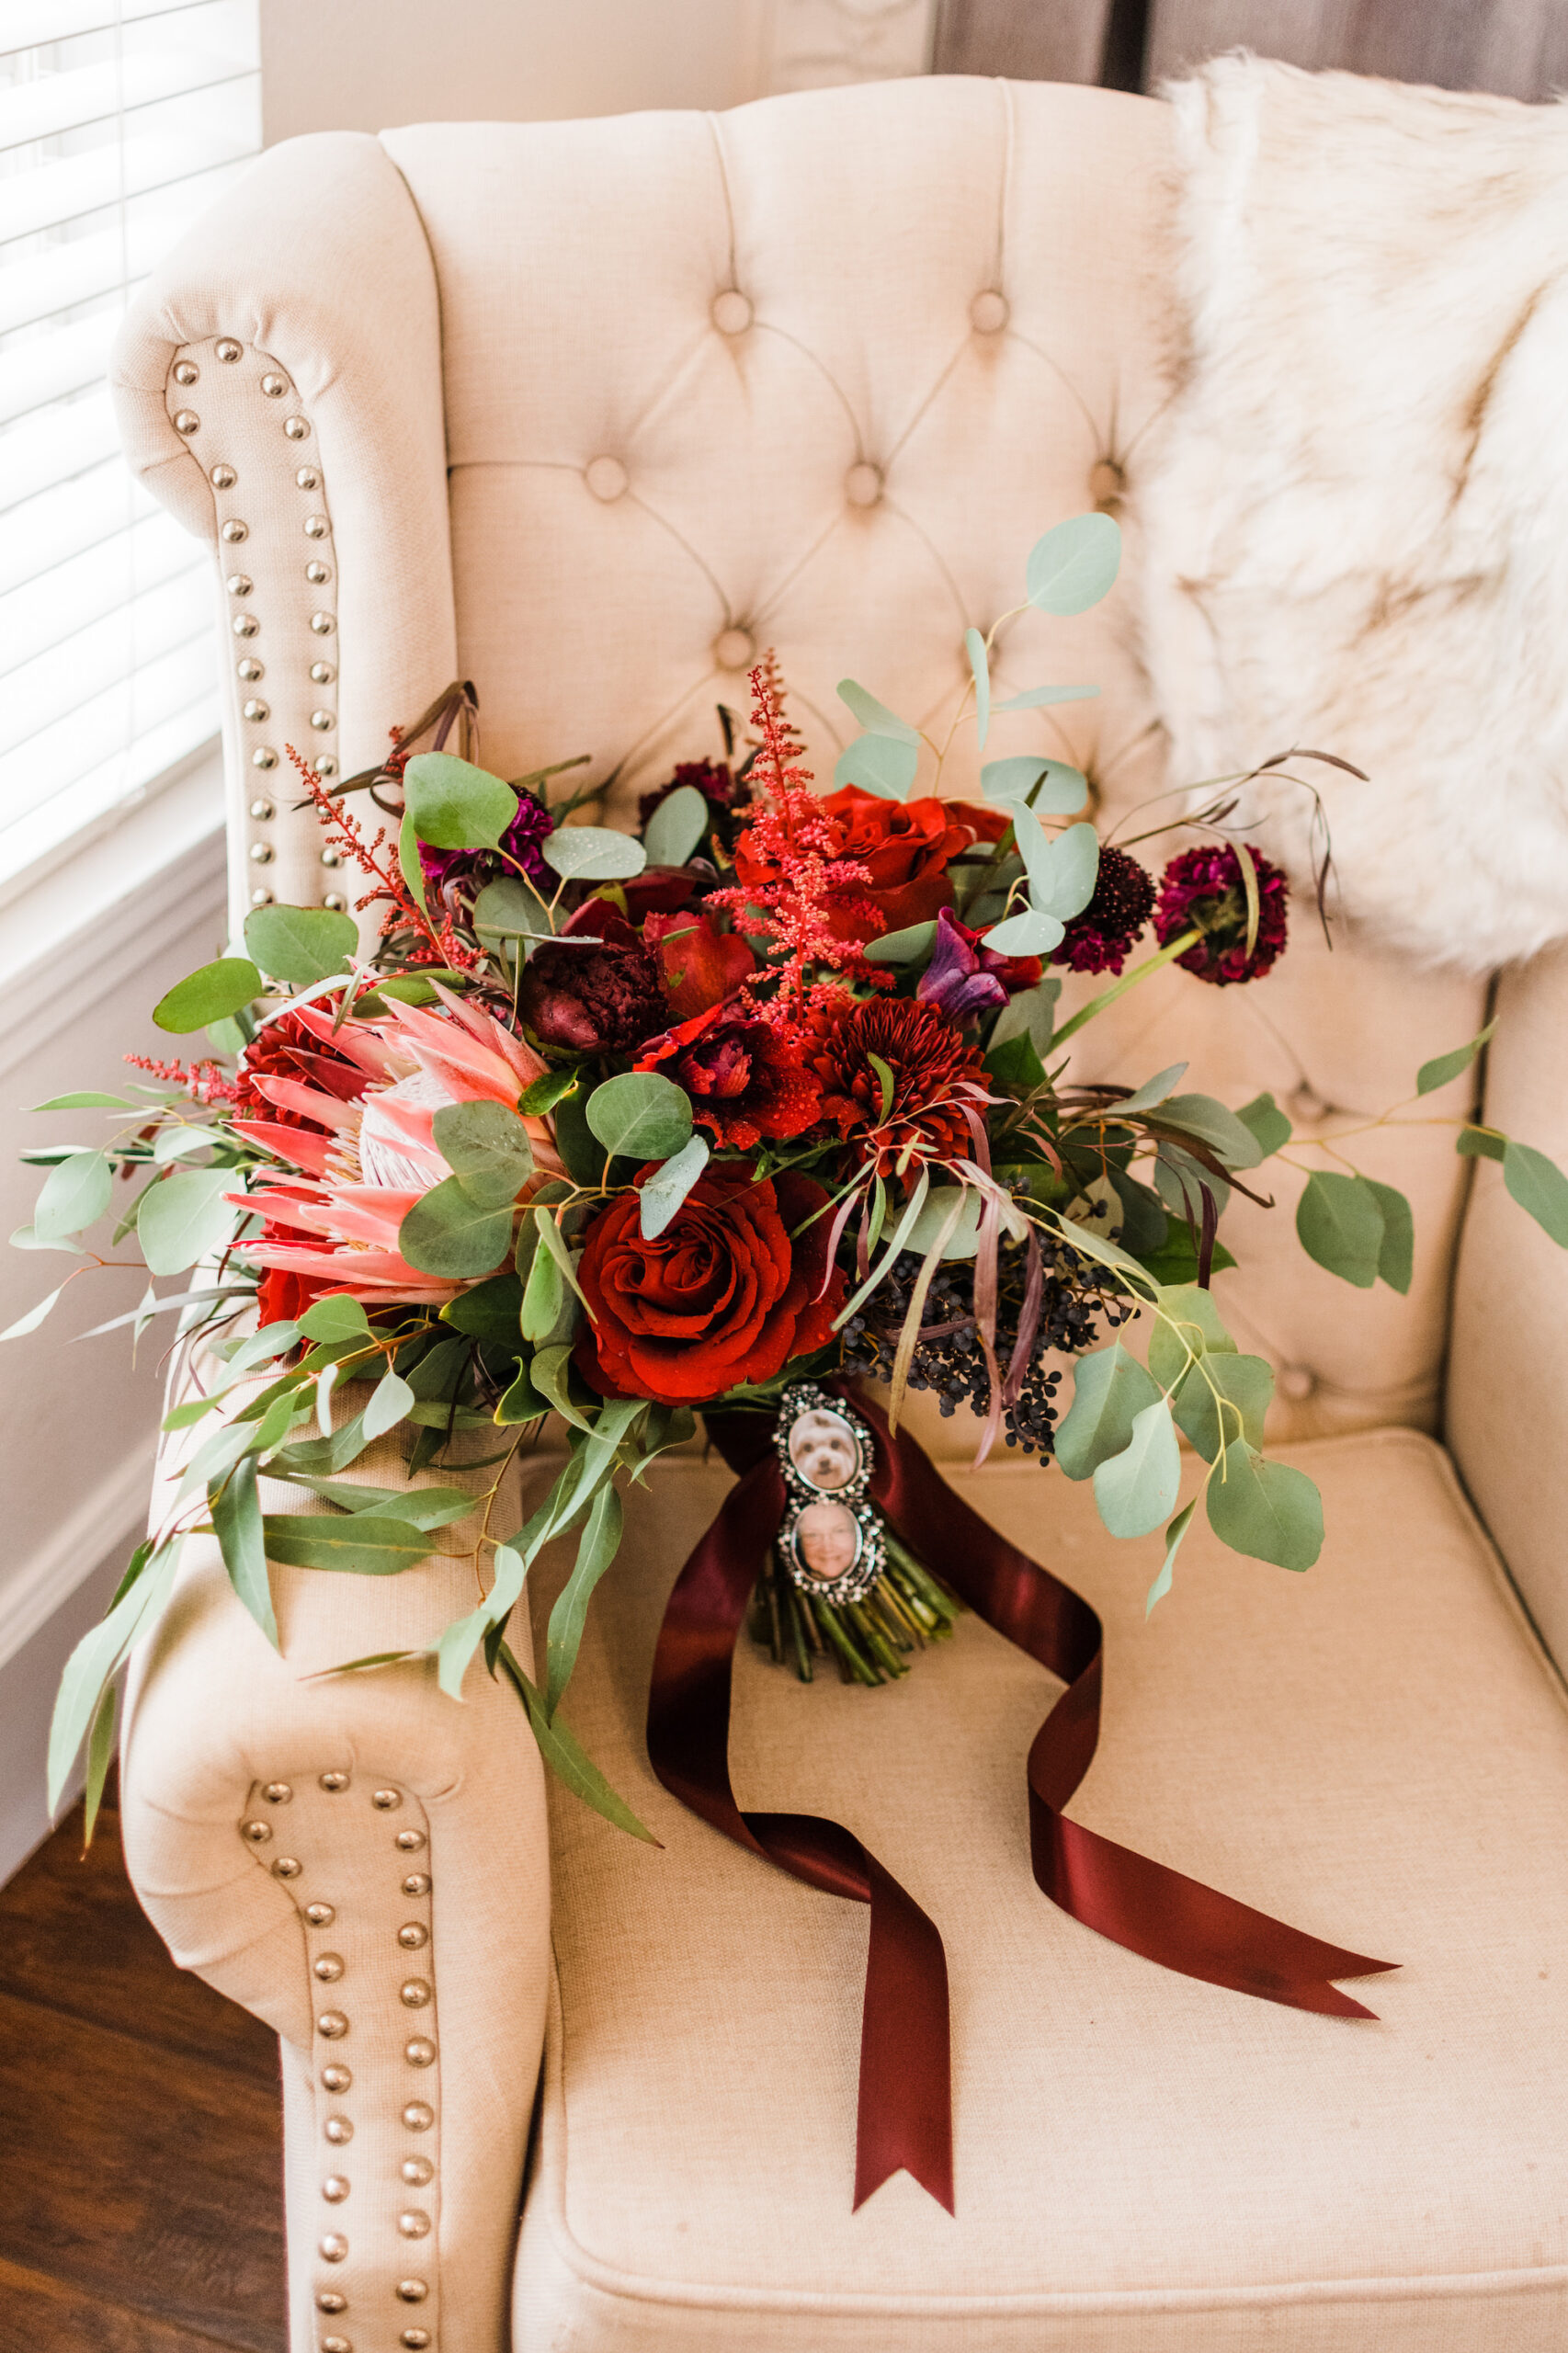 Burgundy Carnations, Roses, Crysanthemums, Pink King Protea Wedding Bouquet with Eucalyptus Greenery | Memorial Photo Charm Inspiration